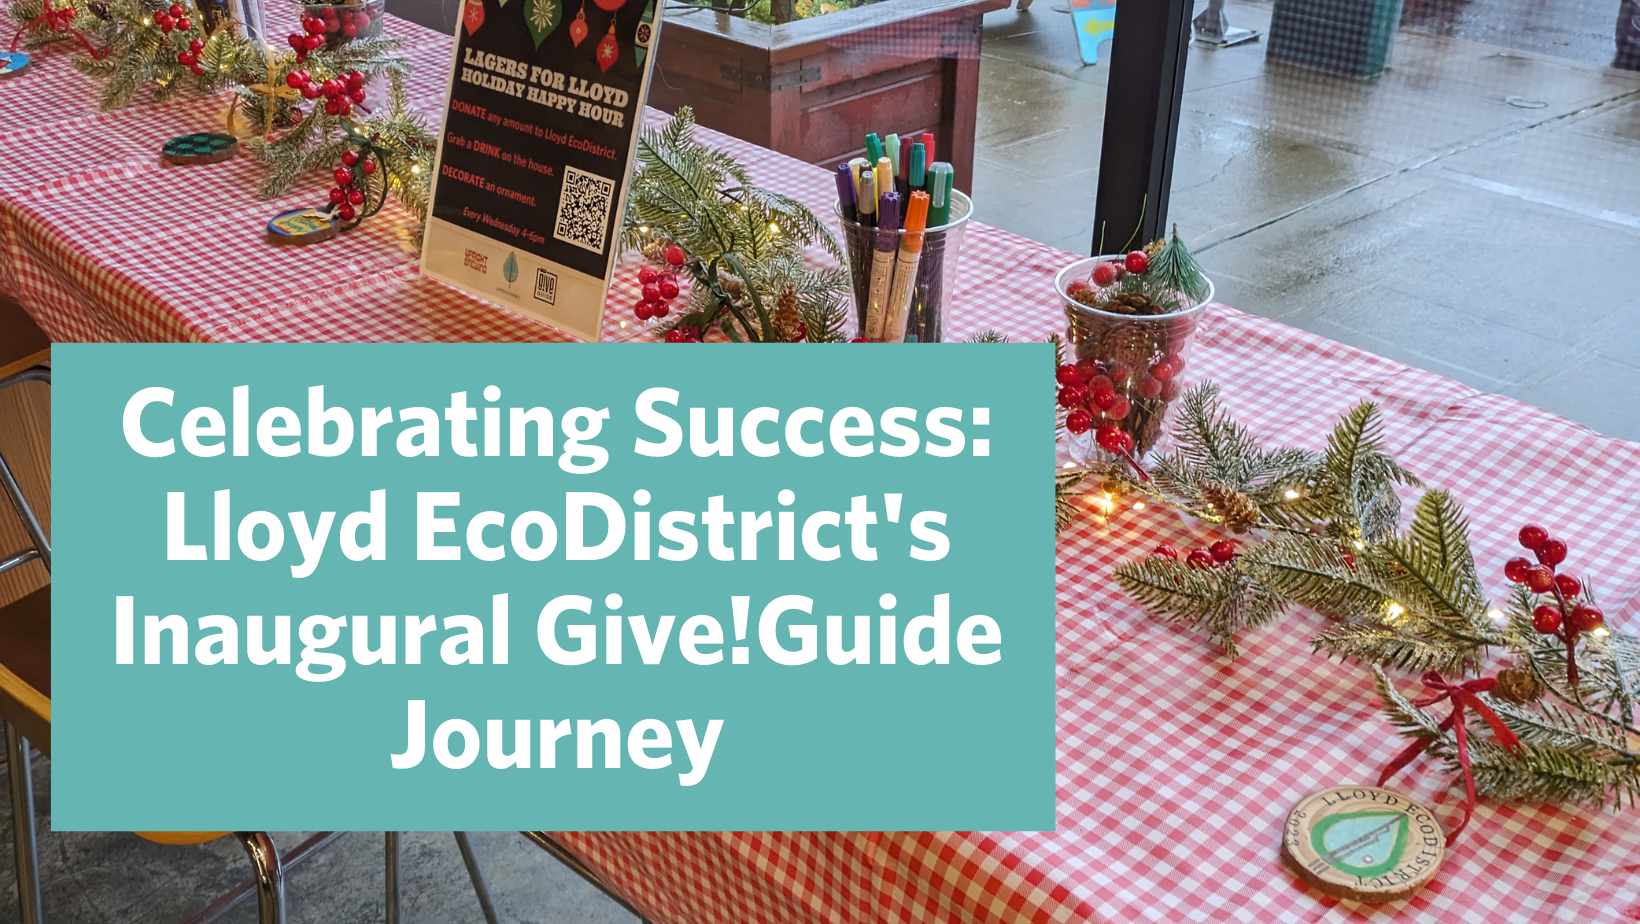 an image of a table with winter holiday decor and ornaments with the words "Celebrating Success: Lloyd EcoDistrict's Inaugural Give!Guide Journey" overlaid.